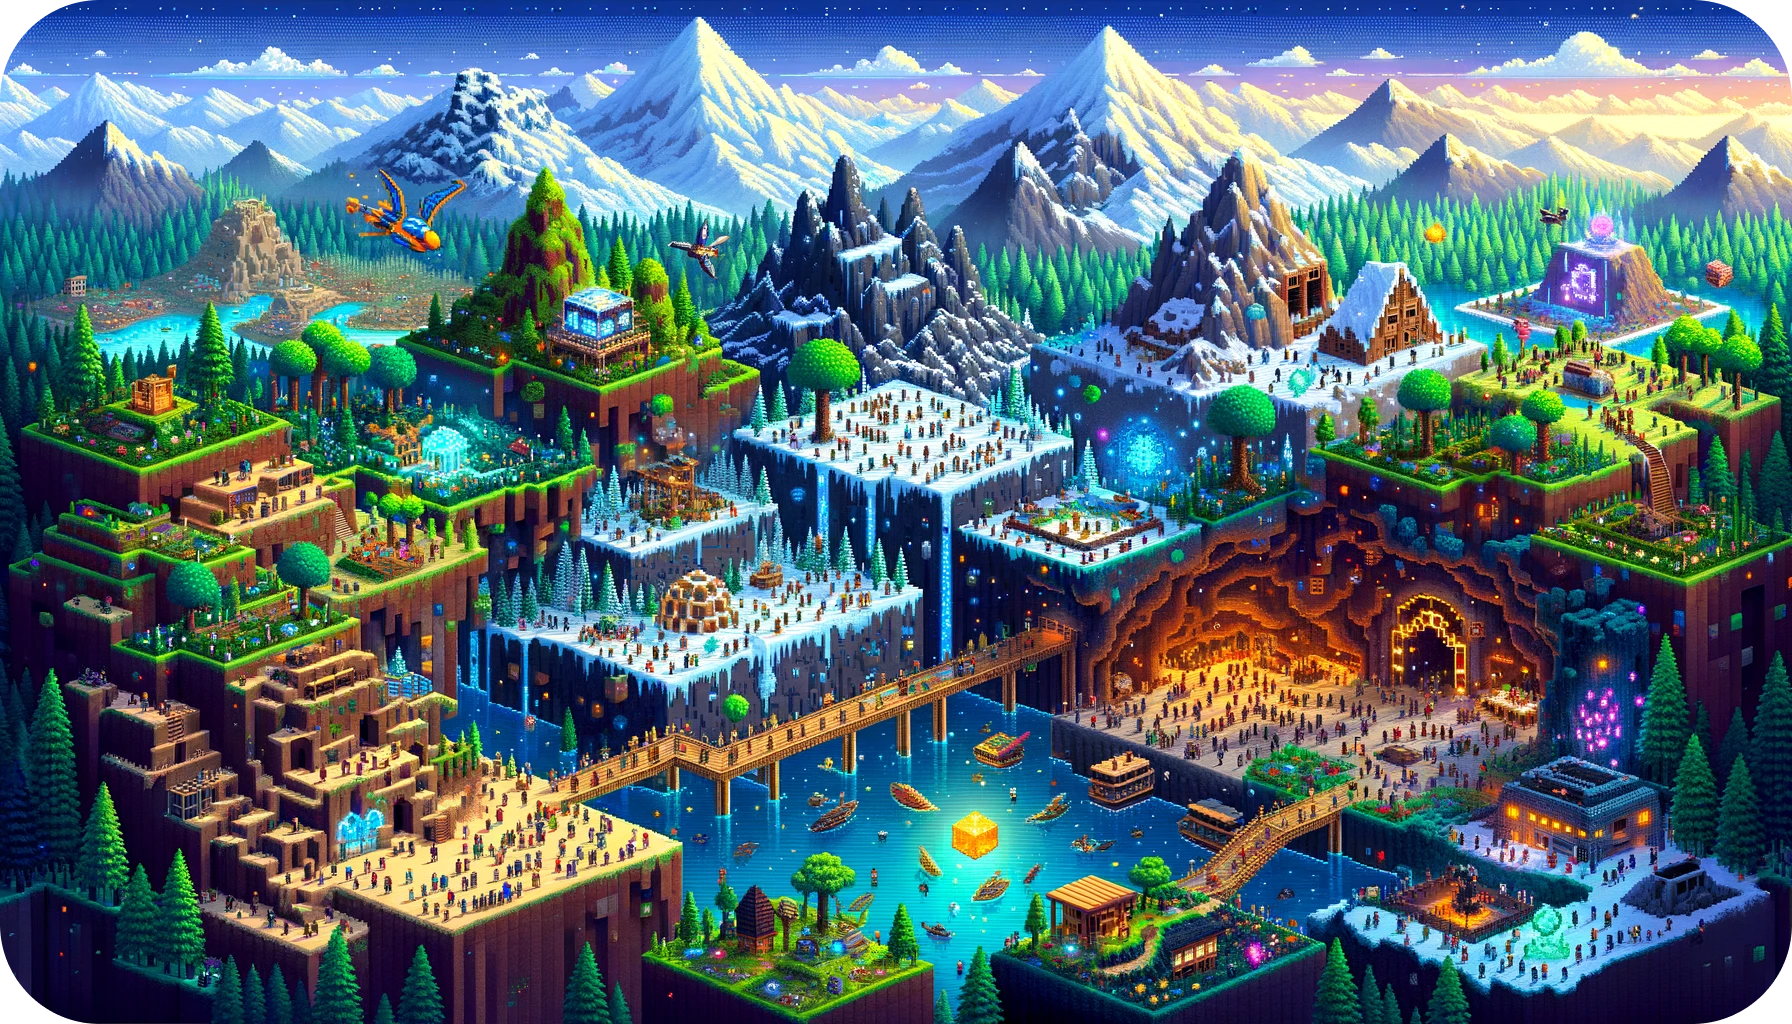 An illustration showcasing a Terraria-inspired landscape with diverse biomes and players engaging in various activities.